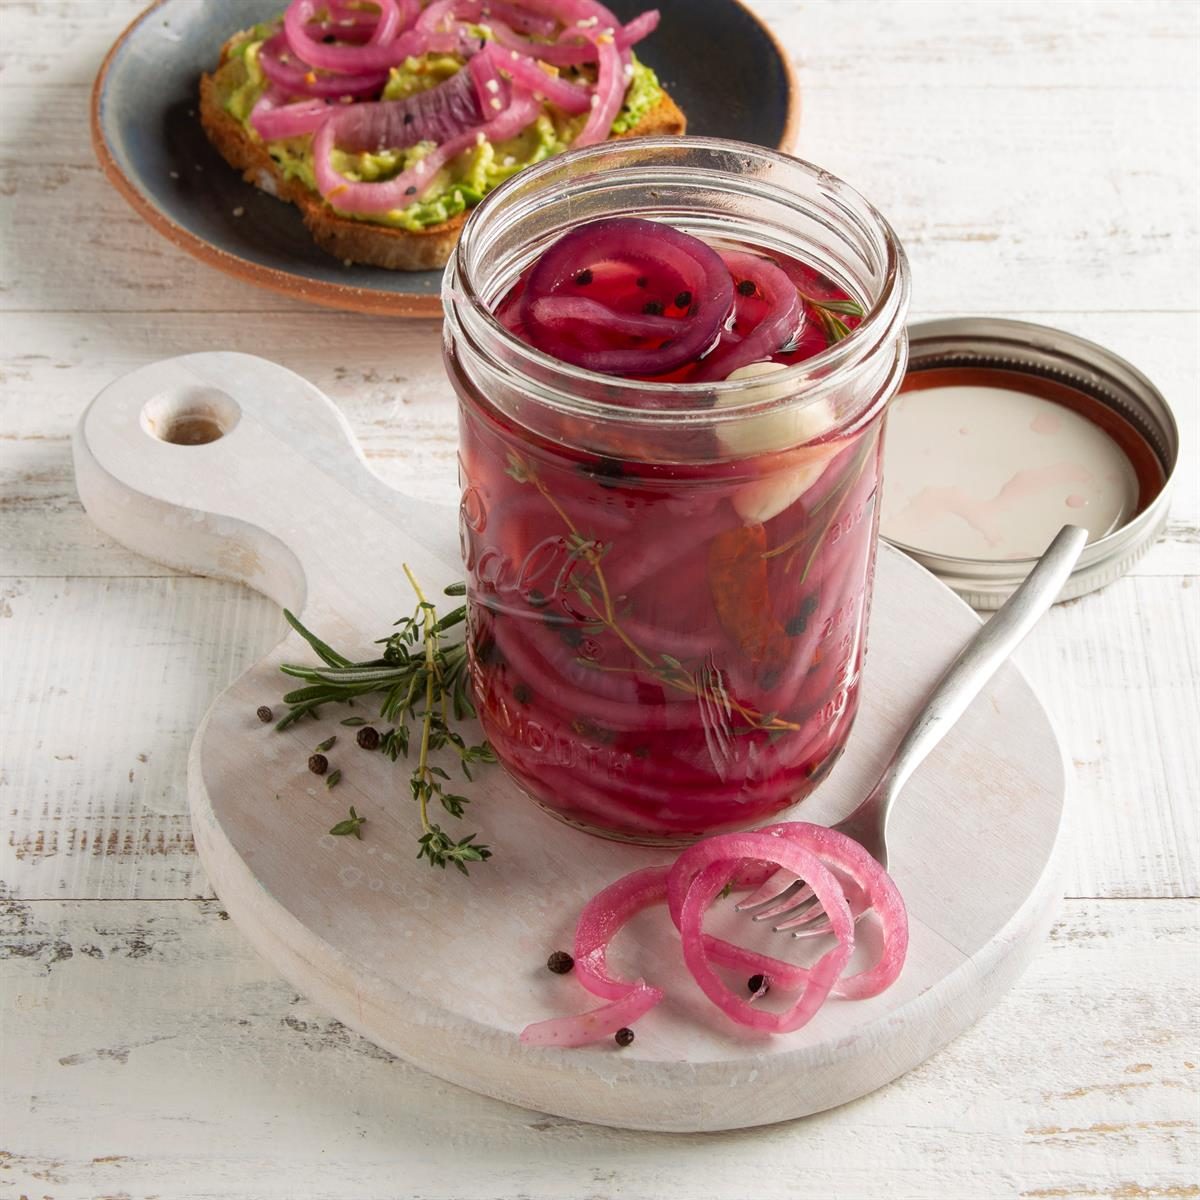 https://www.tasteofhome.com/wp-content/uploads/2021/06/Pickled-Red-Onions_EXPS_FT21_263012_F_0415_1-1.jpg?fit=700%2C1024